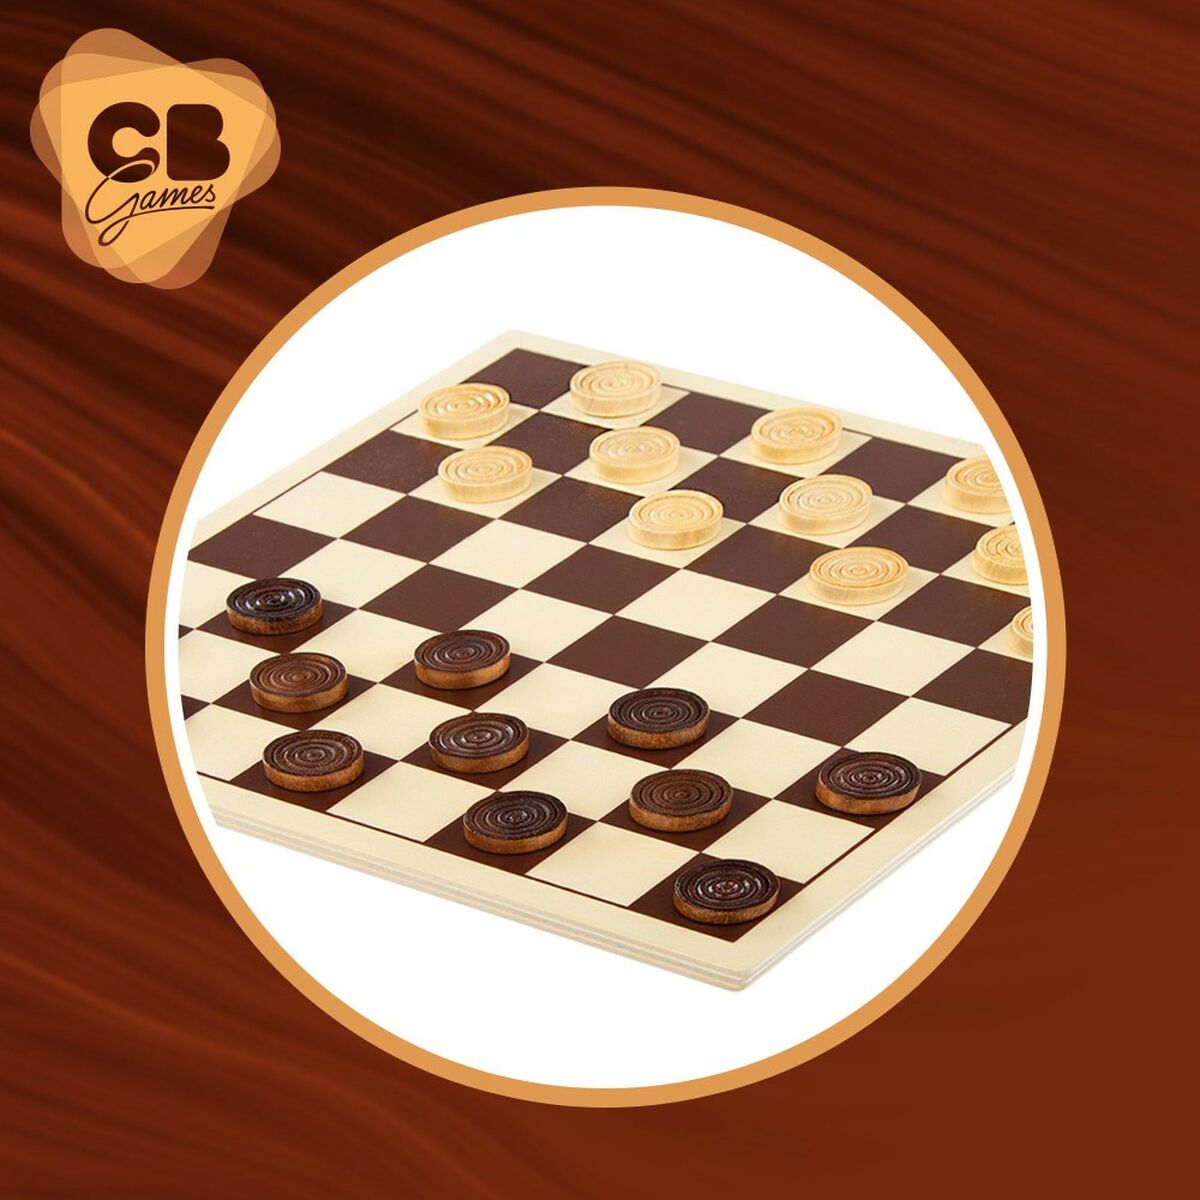 Chess and Checkers Board Colorbaby Wood Metal (6 Units) - Little Baby Shop